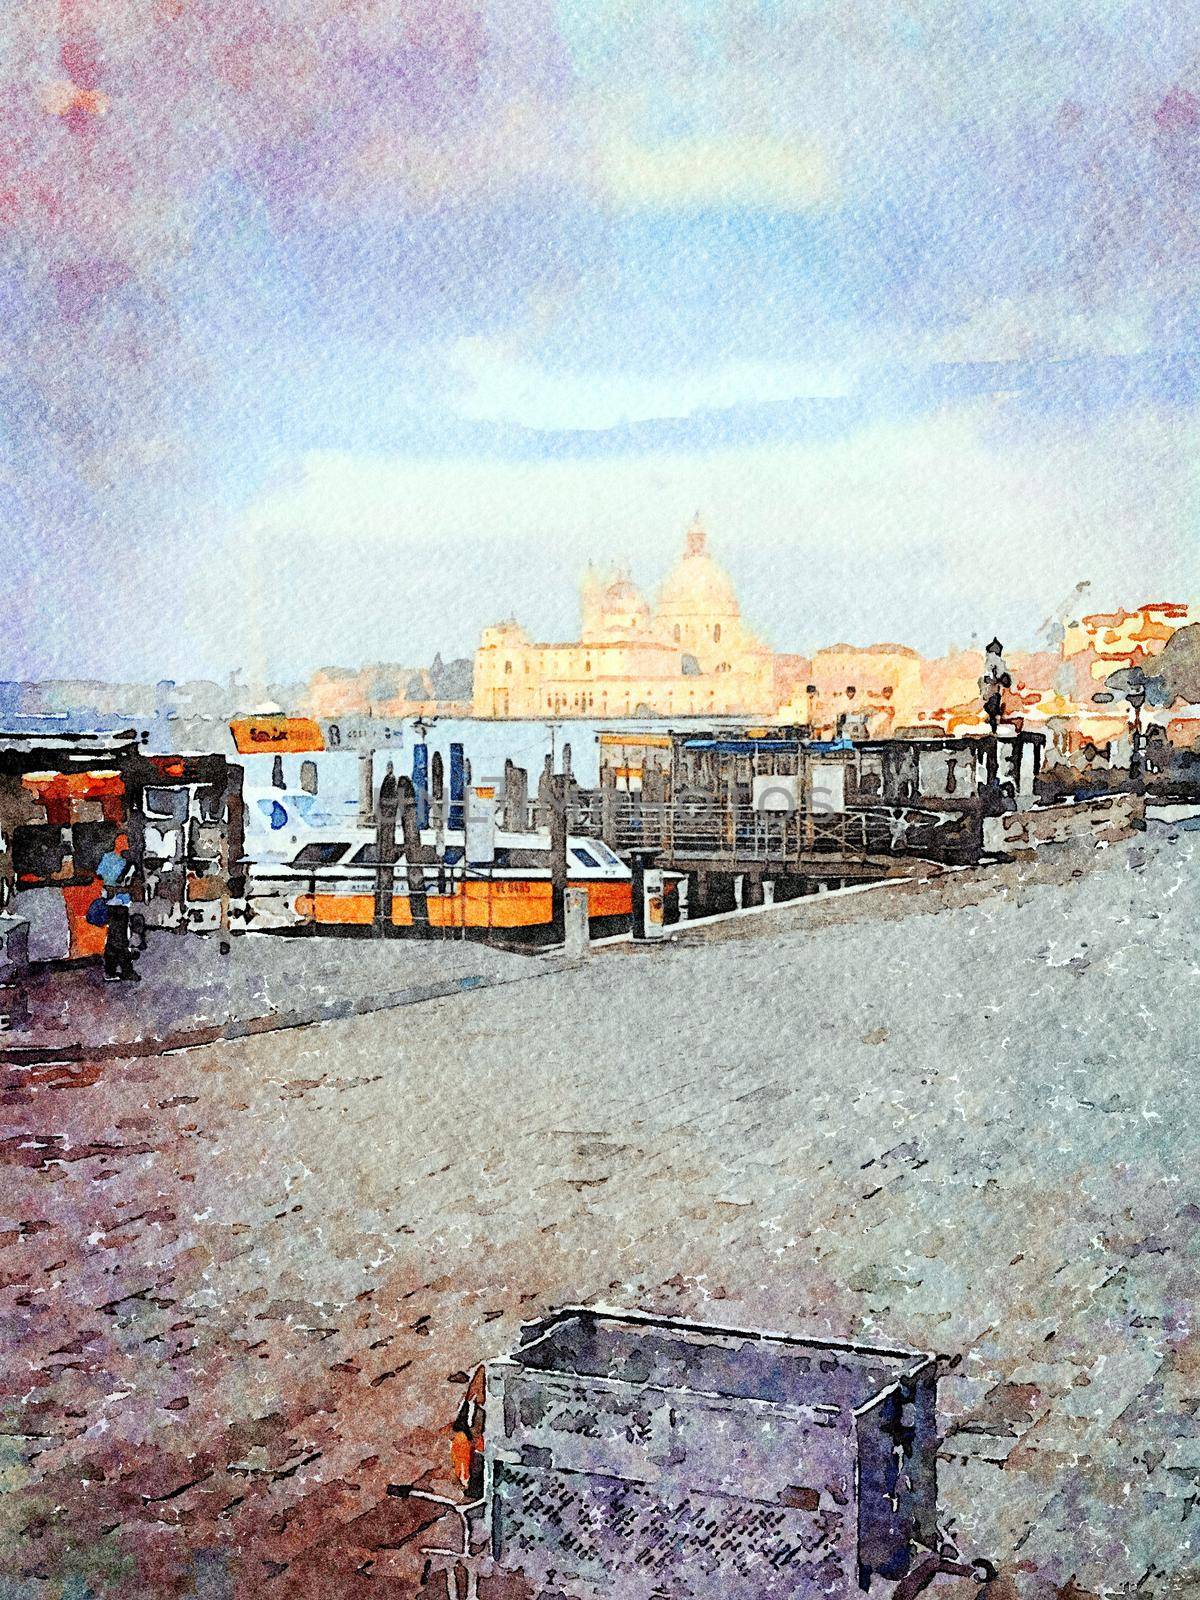 Watercolor representing the view of one of the cathedrals of Venice